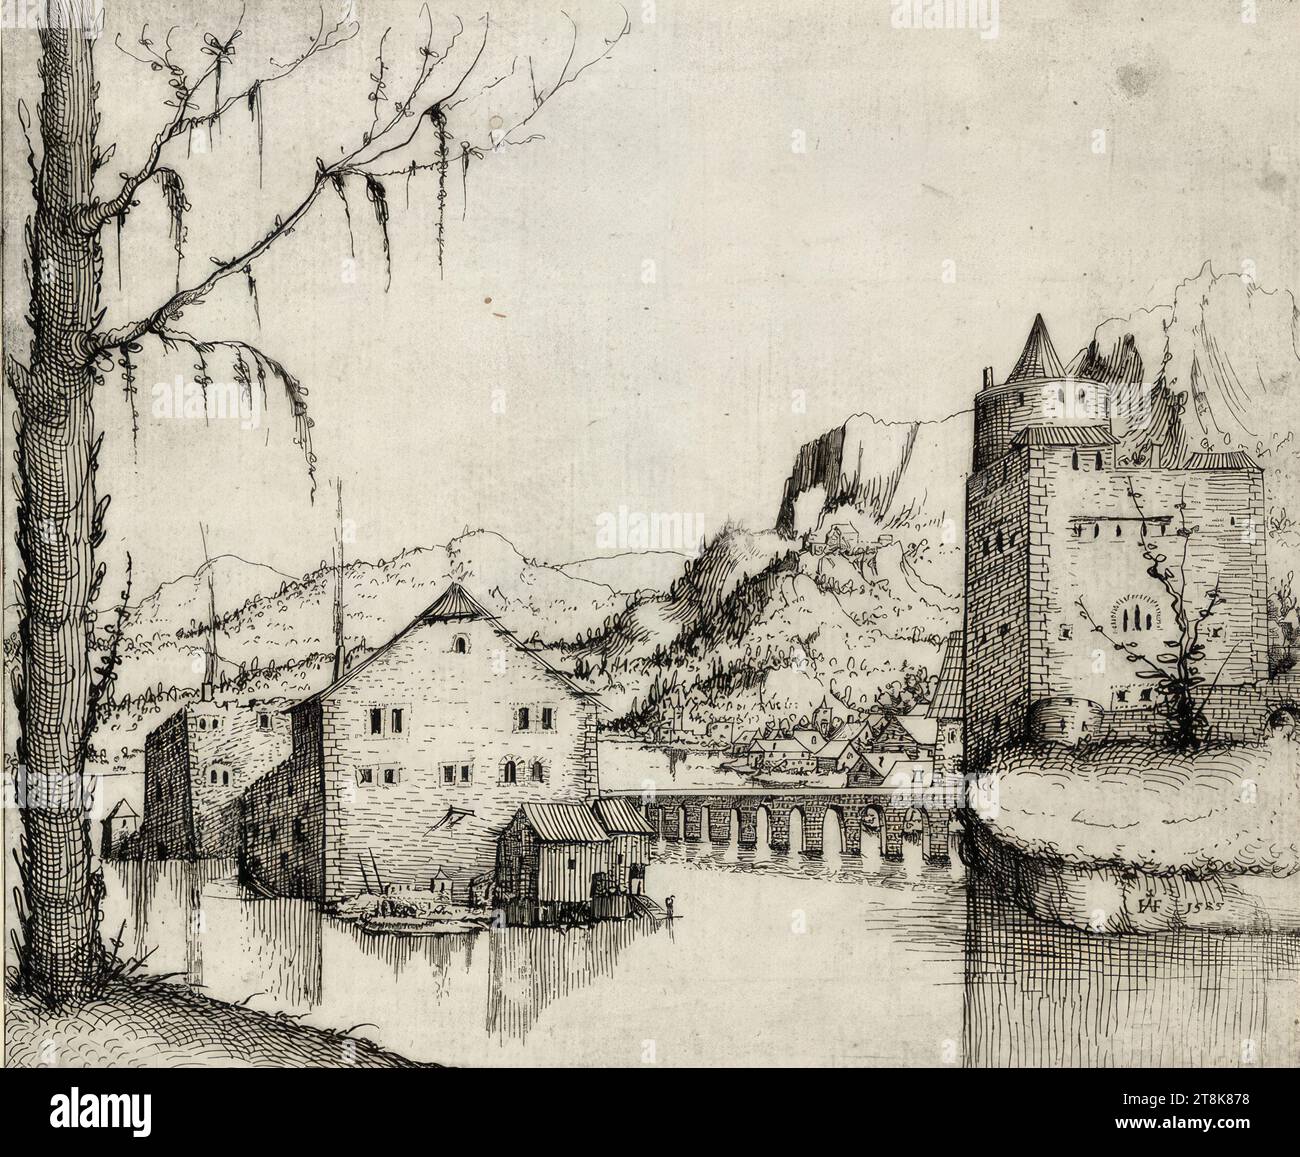 River landscape with two buildings in the water, Augustin Hirschvogel, Nuremberg 1503 - 1553 Vienna, 1545, print, etching, plate: 15.3 x 18.5 cm, Austria Stock Photo